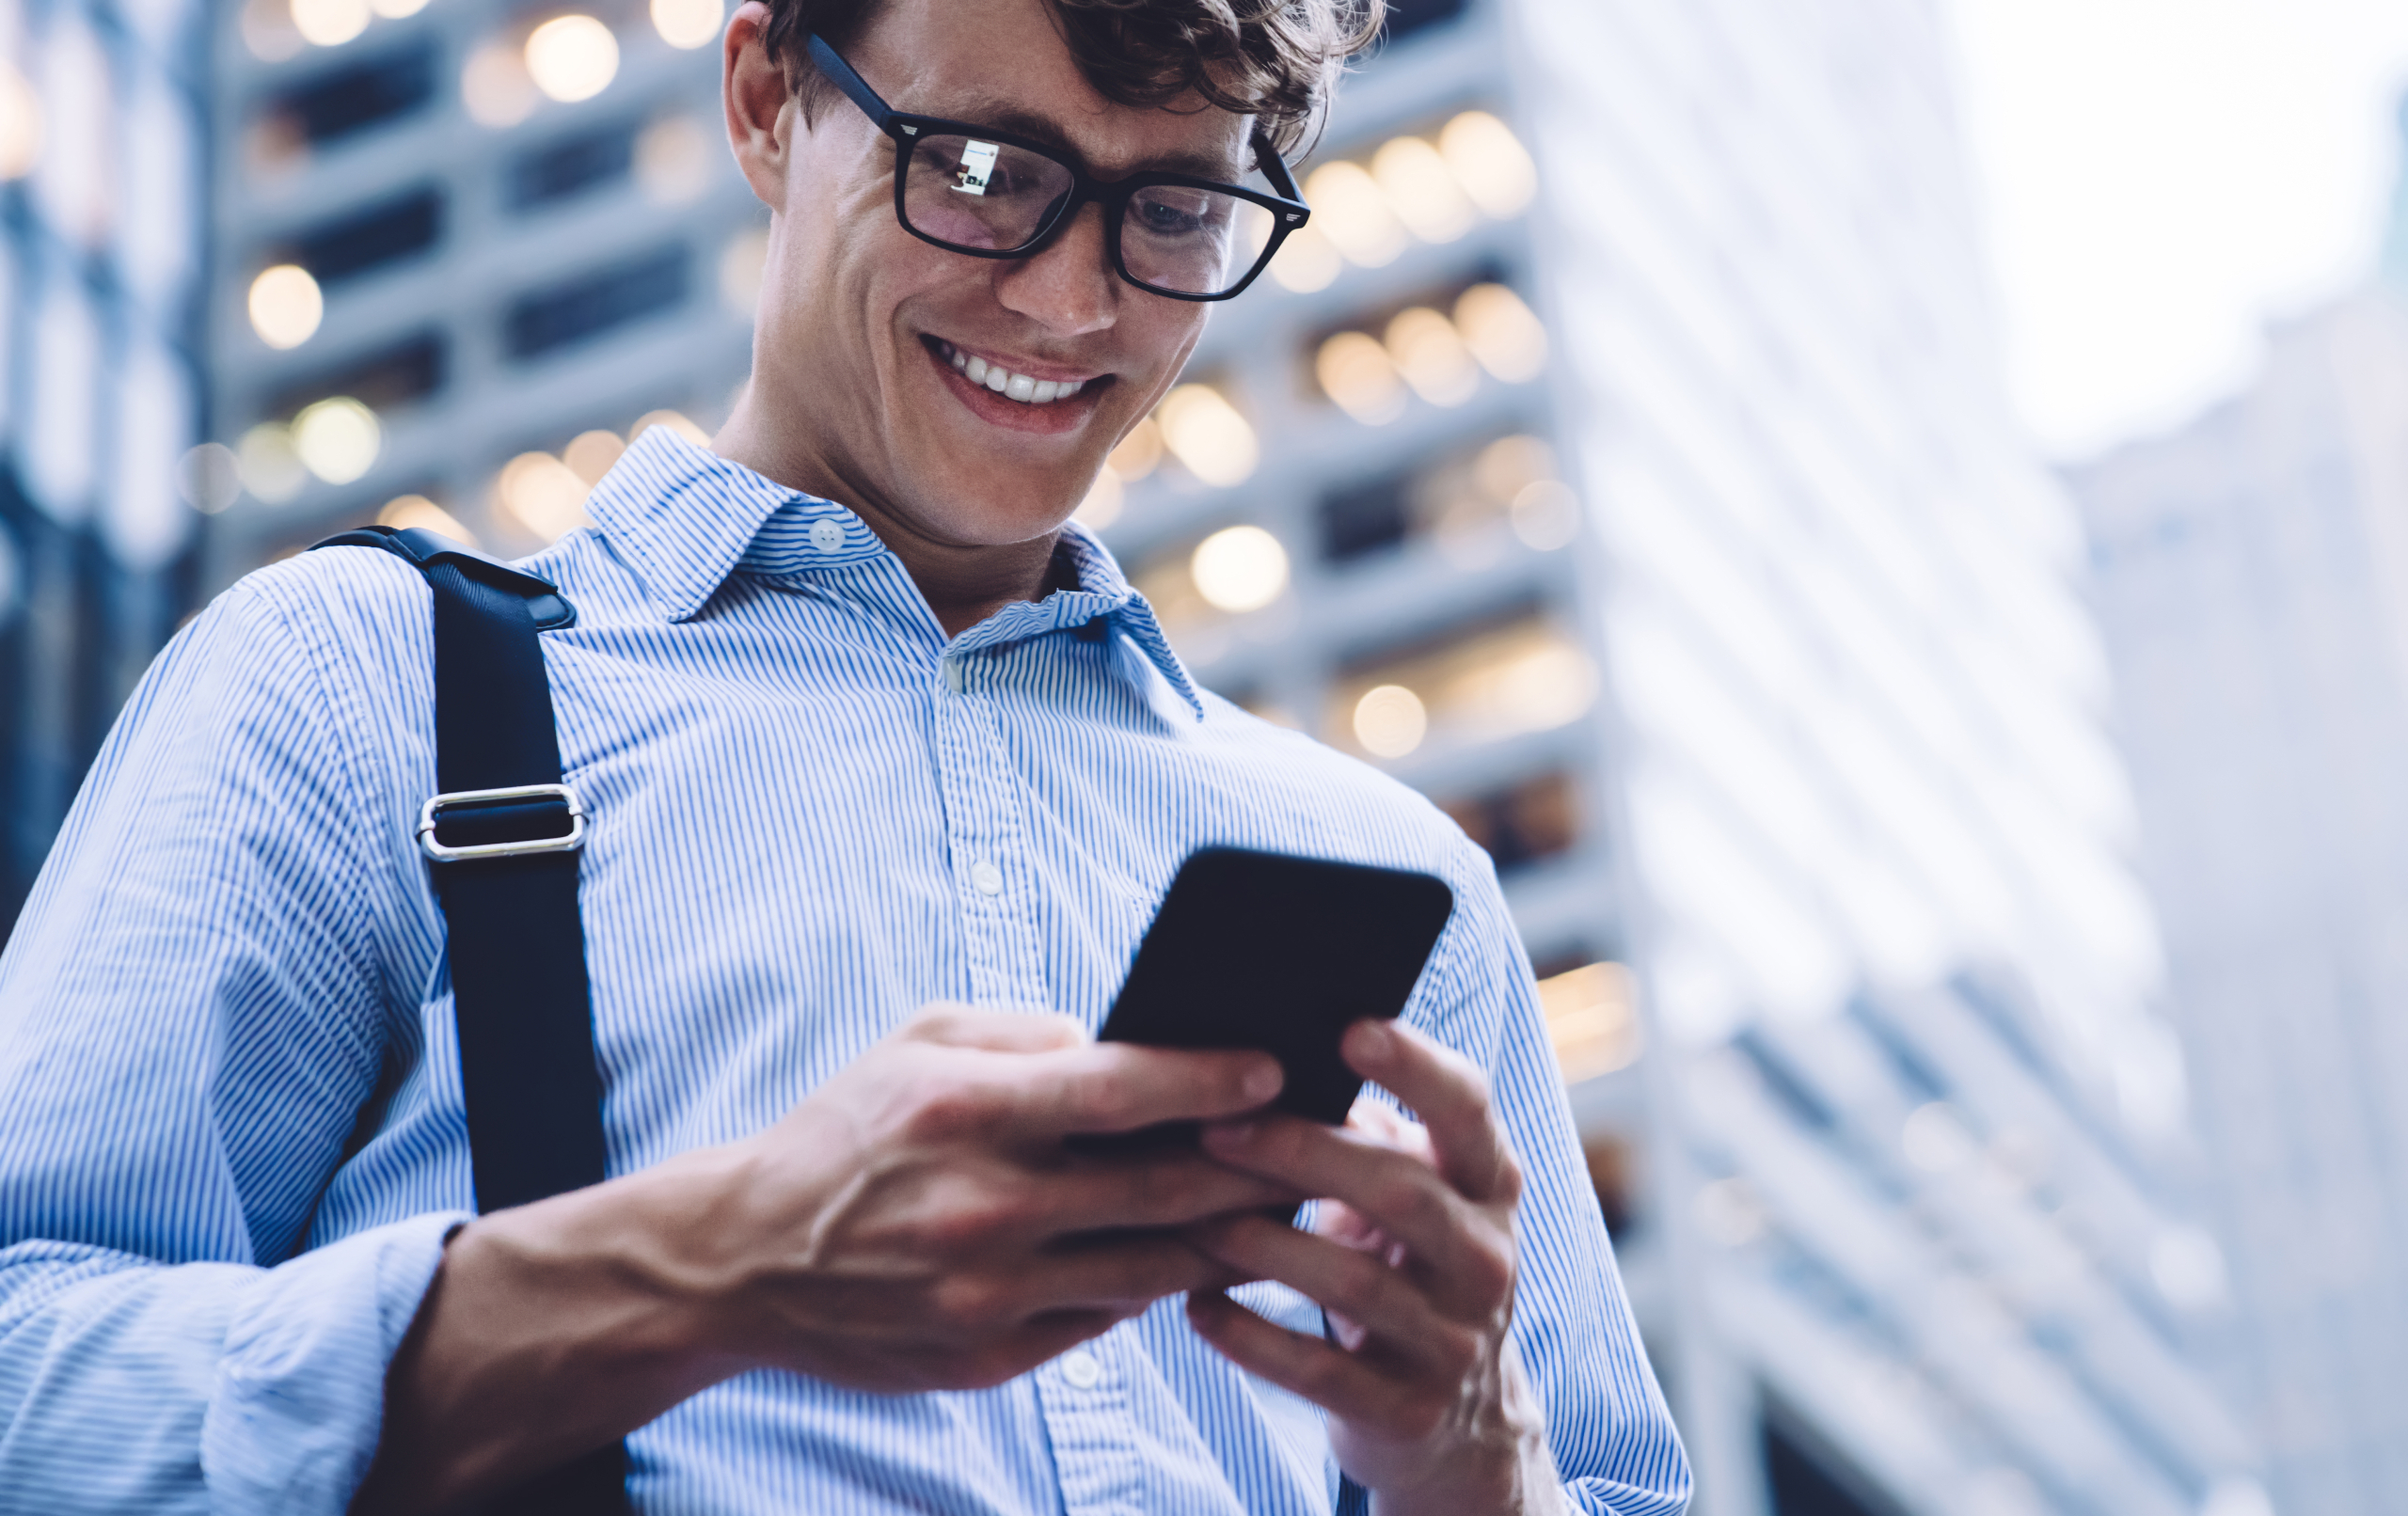 Man checking accounts on phone smiling